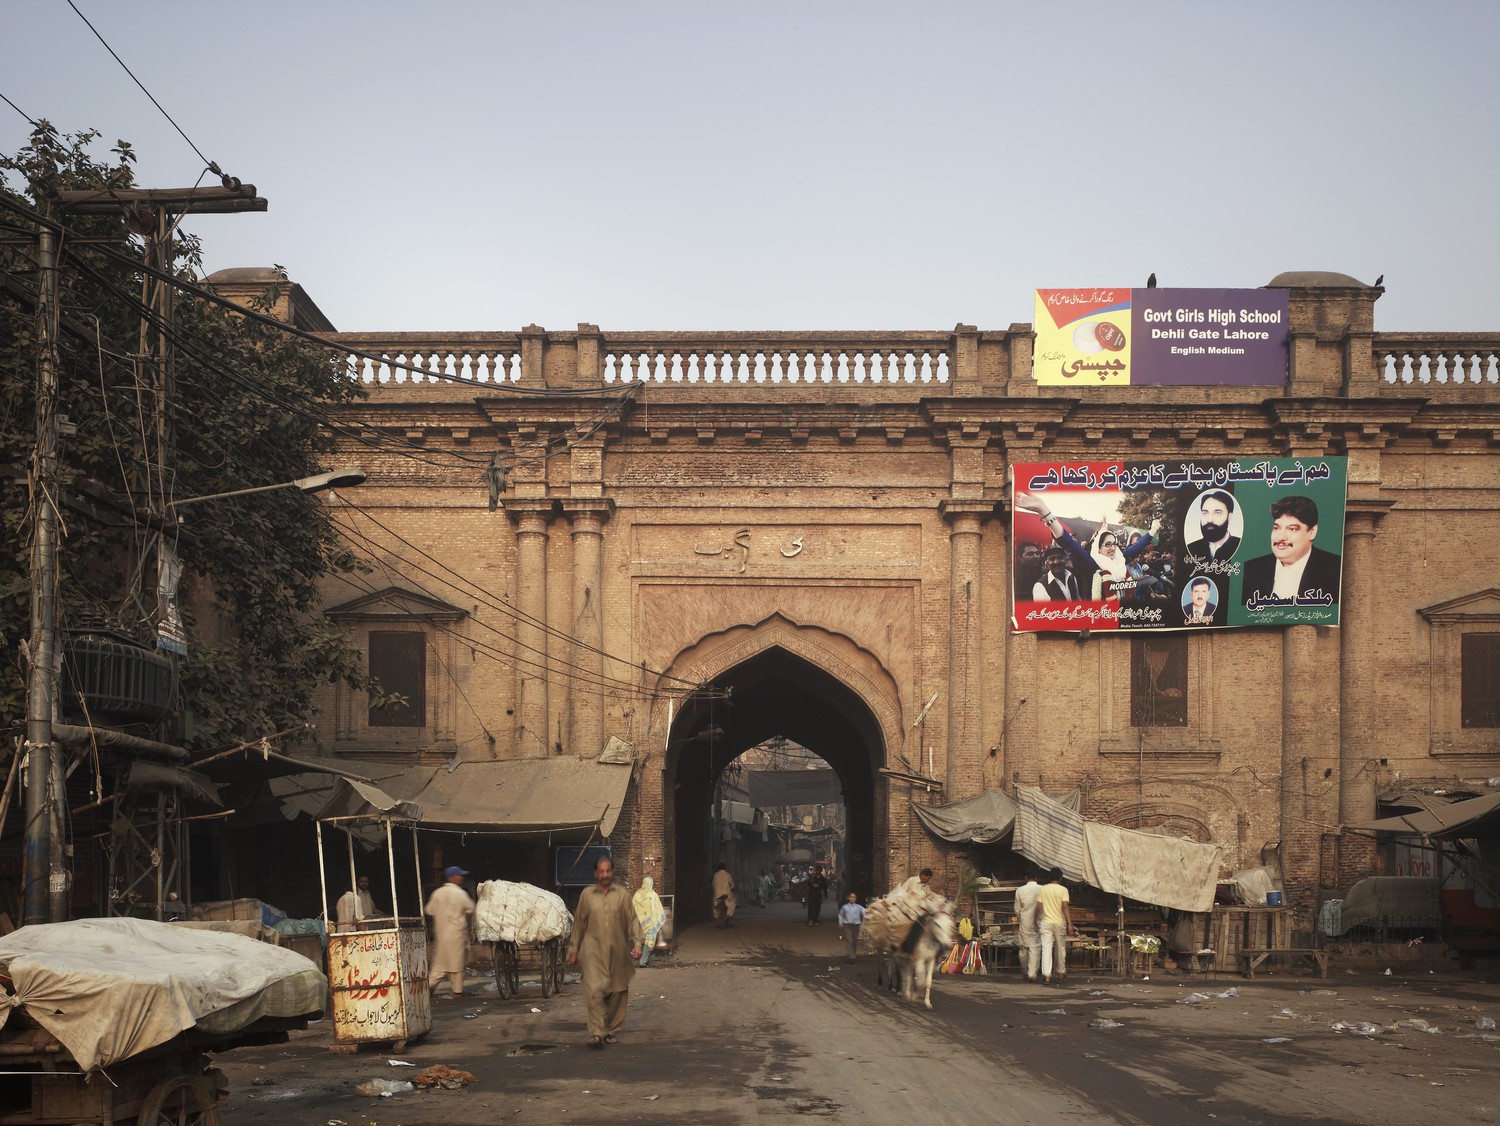 Delhi Gate, entrance to the Walled City